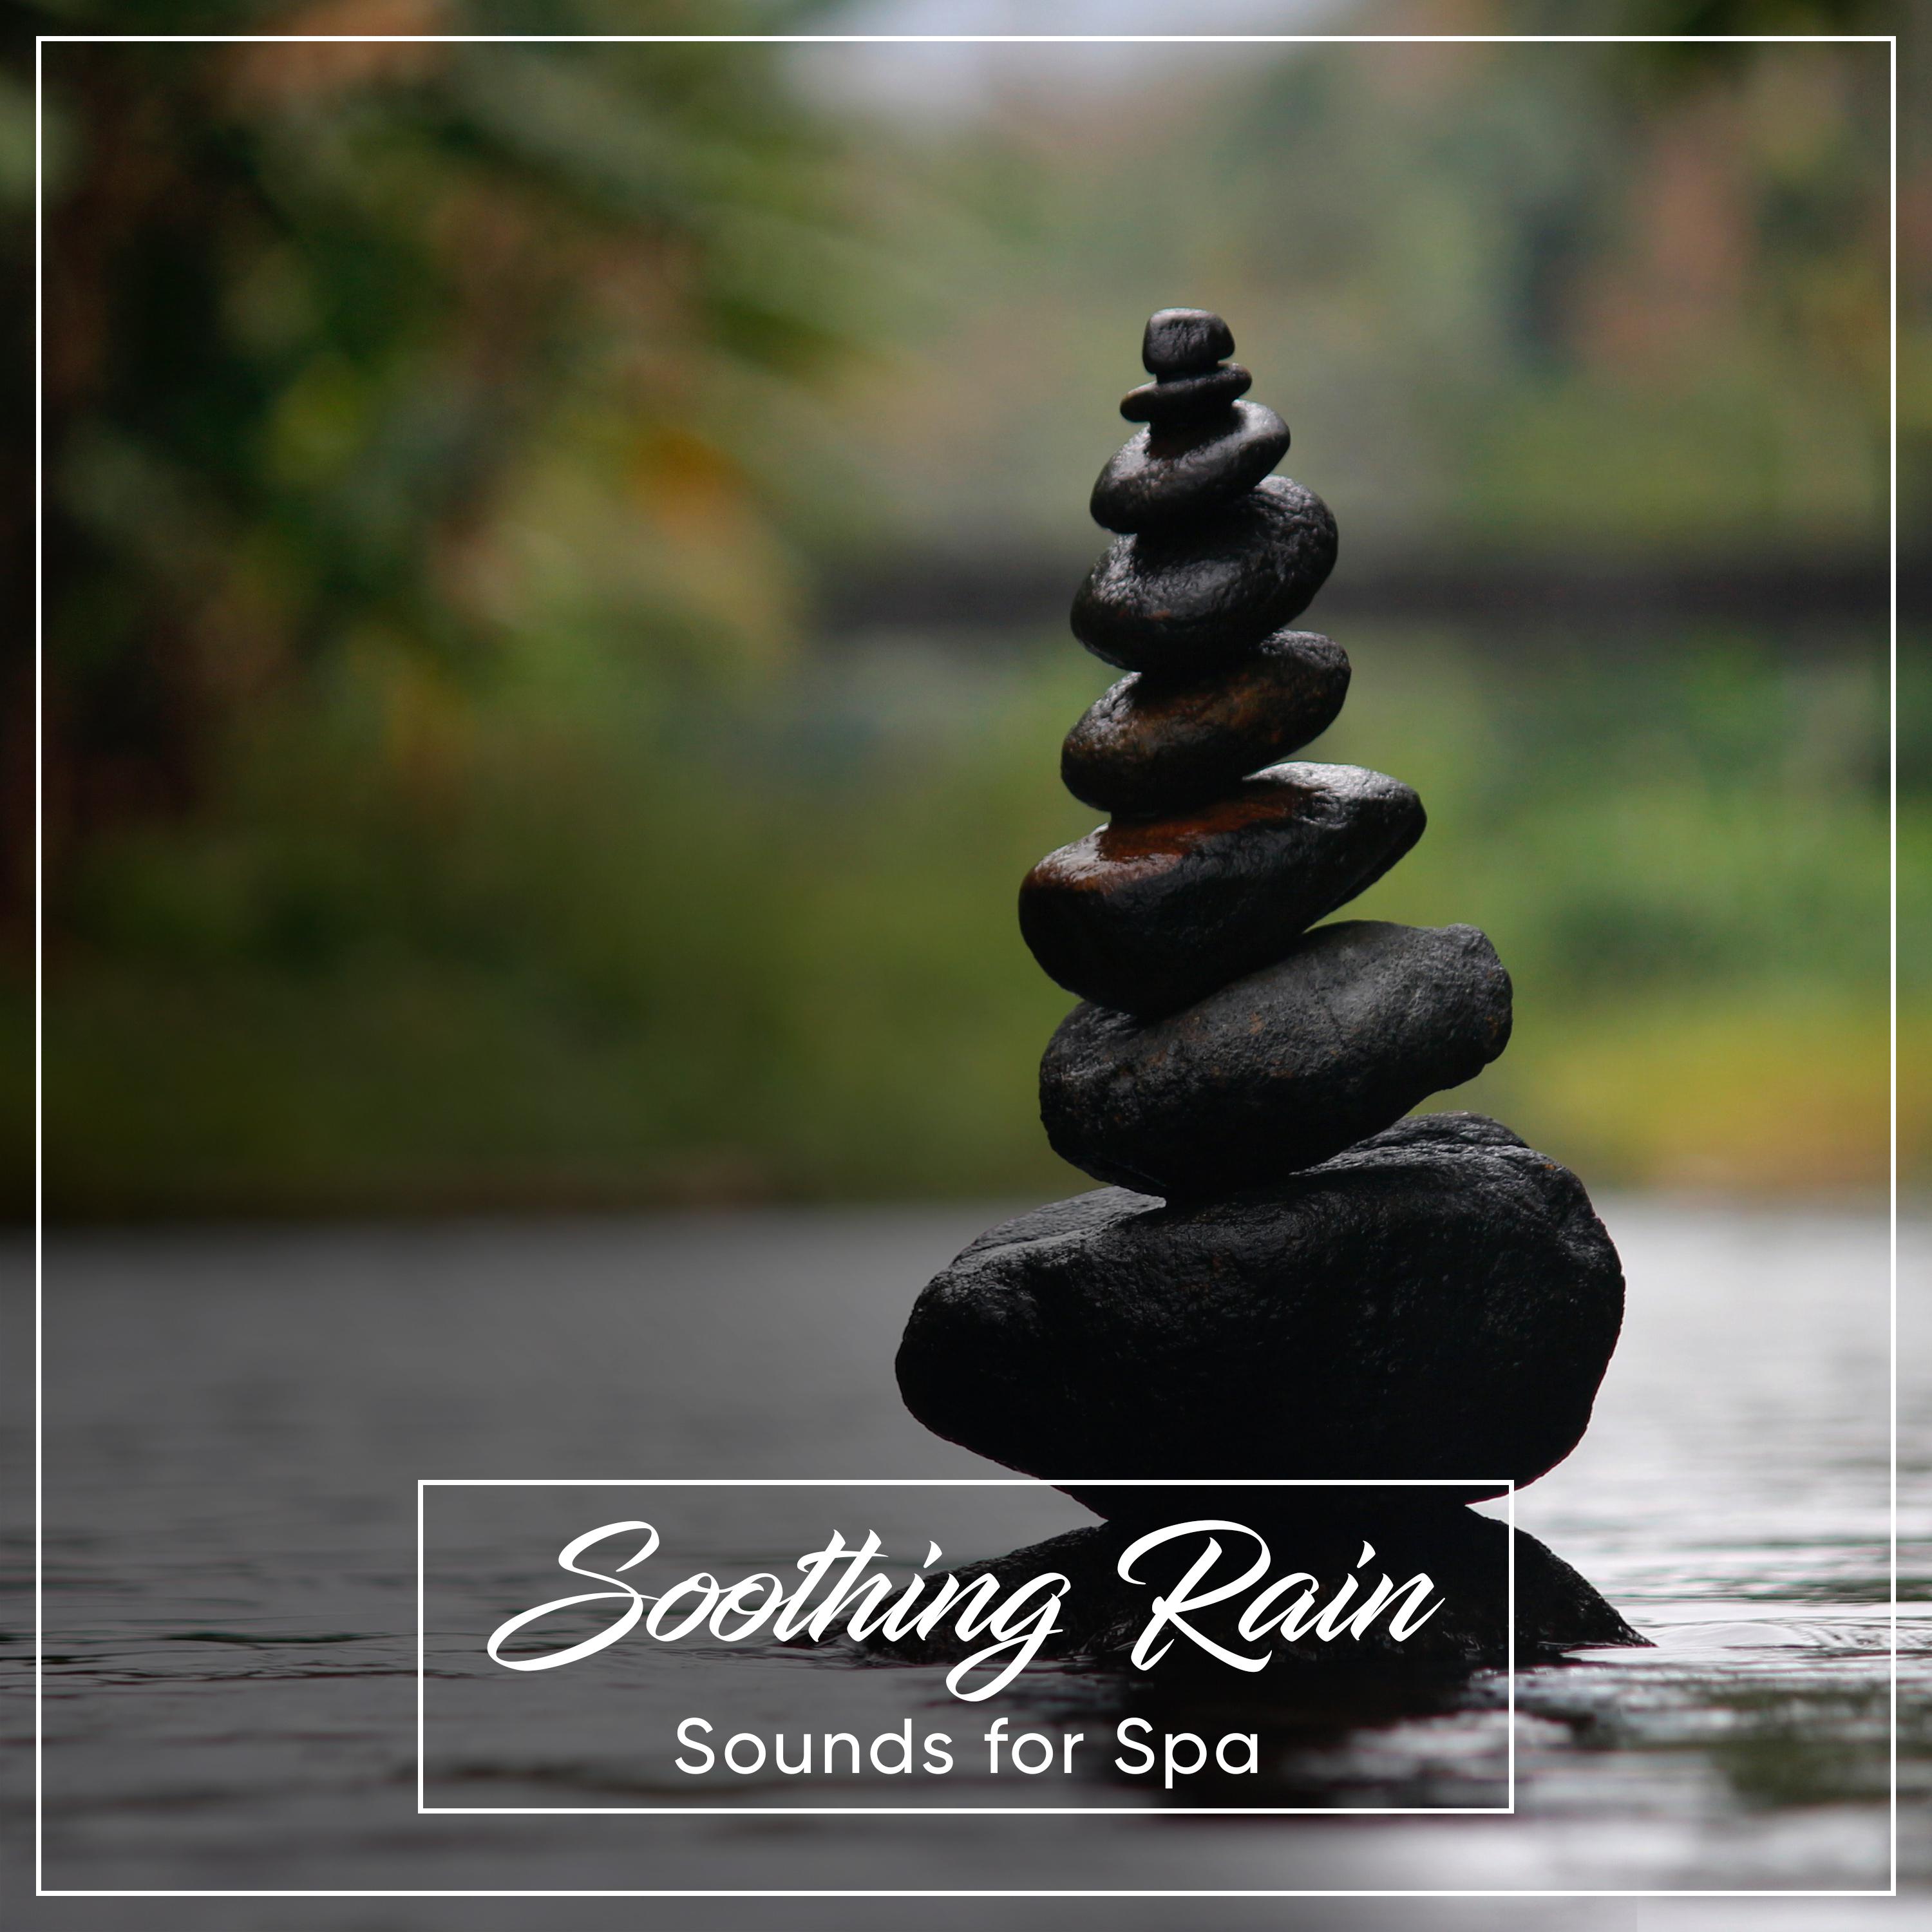 19 Sounds of Thunder for Spa Relaxation - Gentle Rumbling with Rain